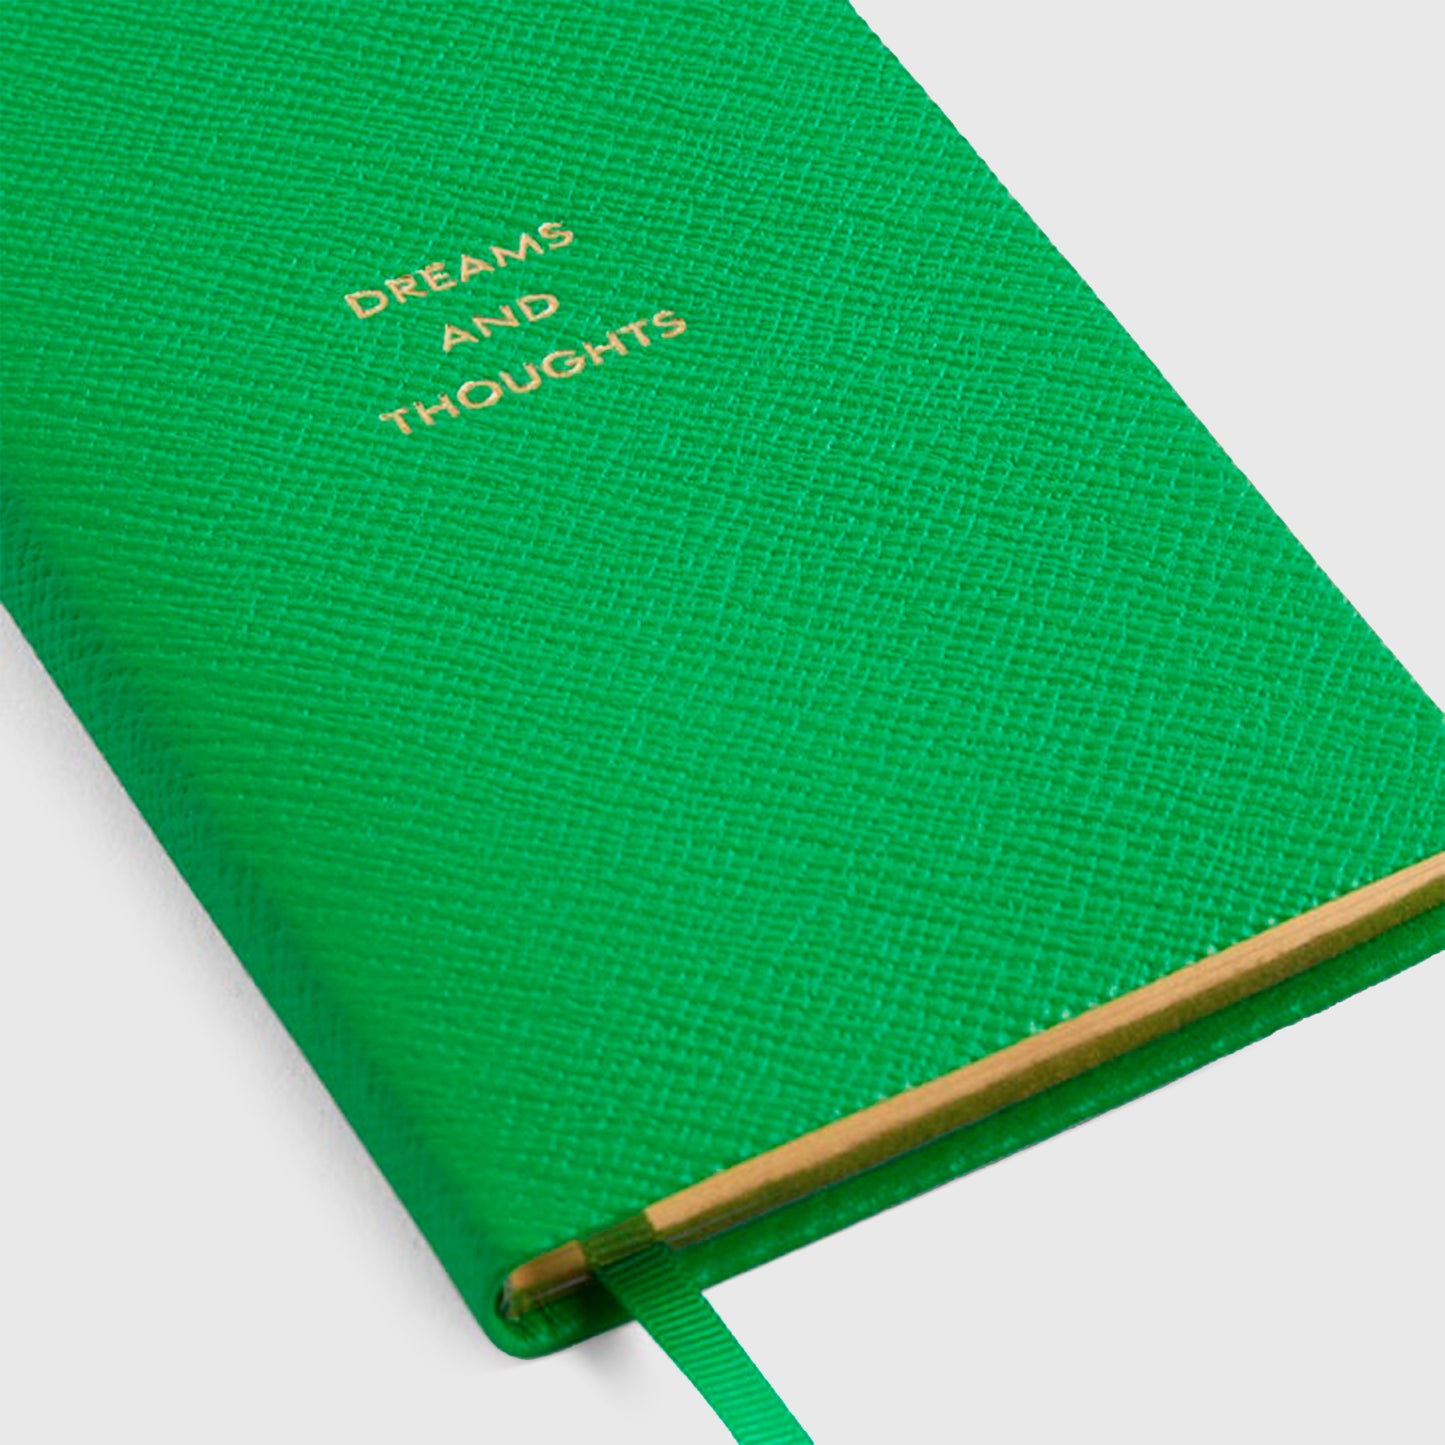 Dream and Thoughts Panama Notebook Emerald